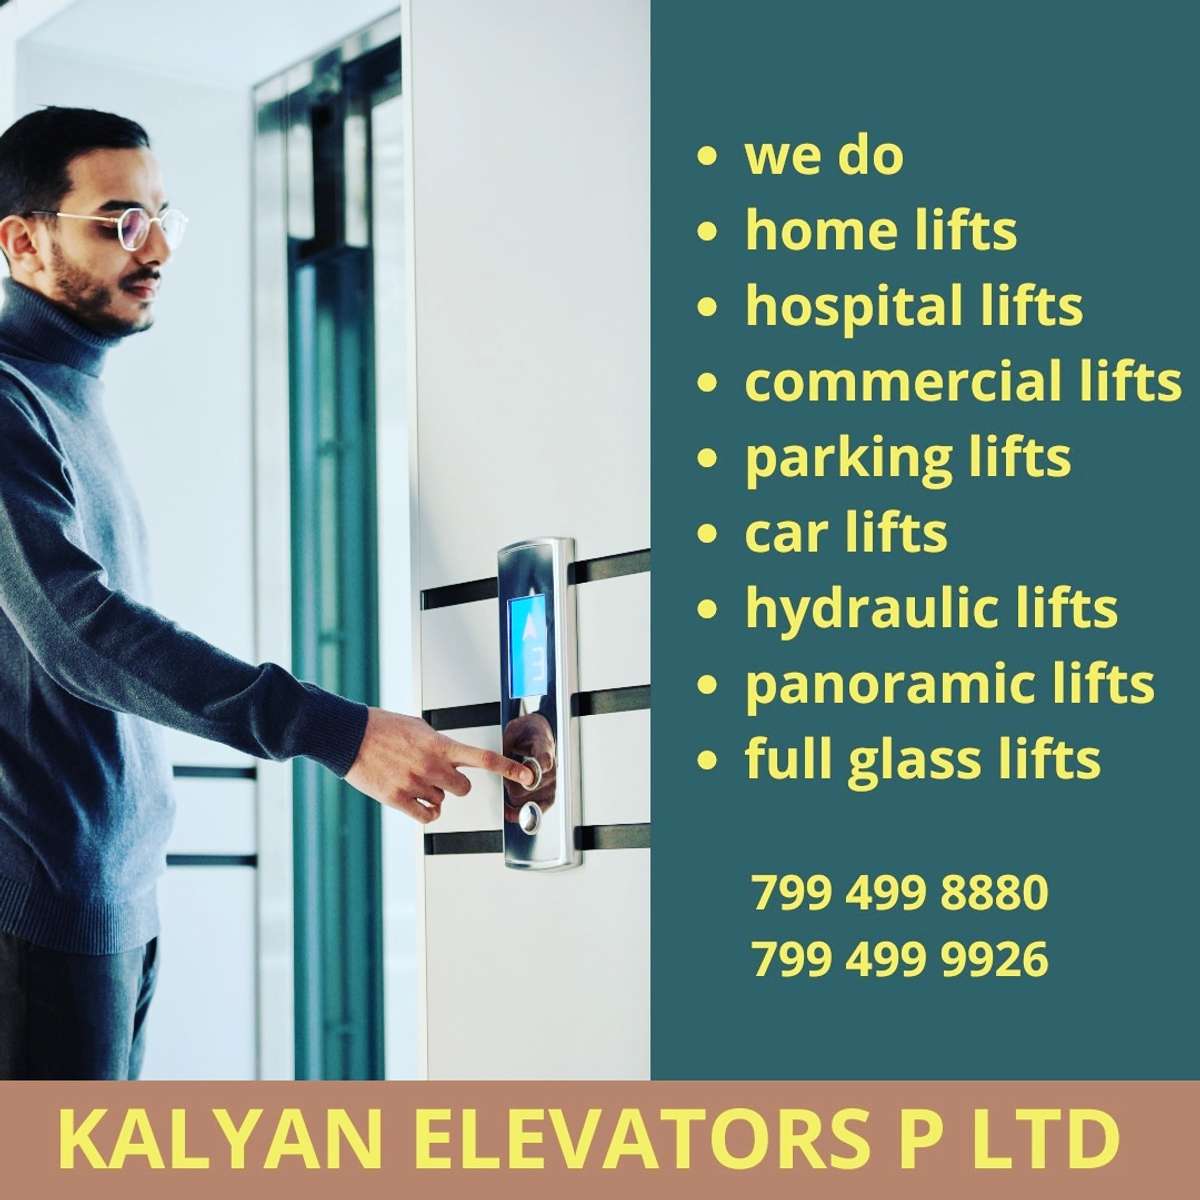 related passenger lift new installation
consider my company please 